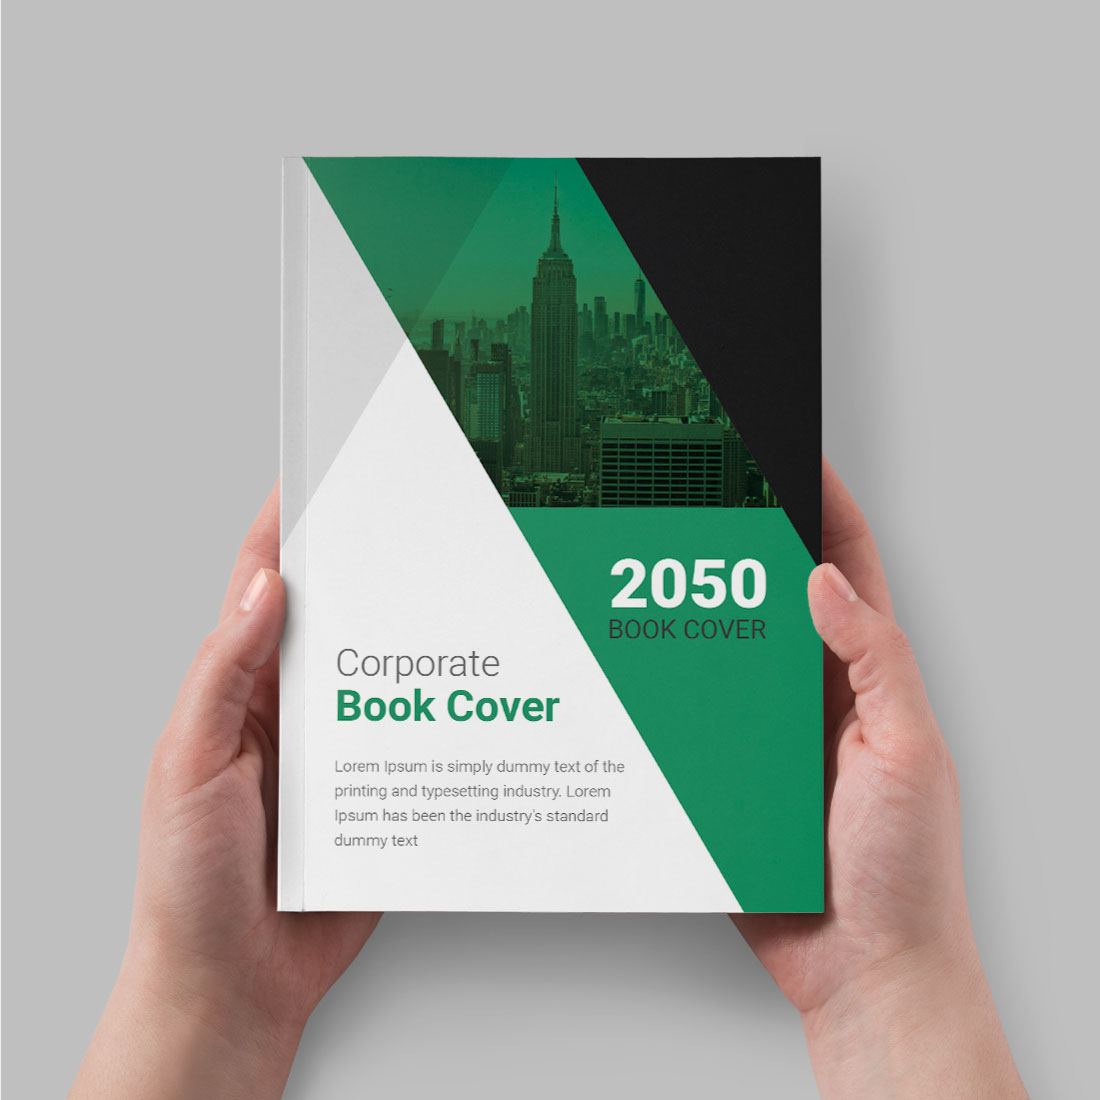 Corporate book cover design preview image.